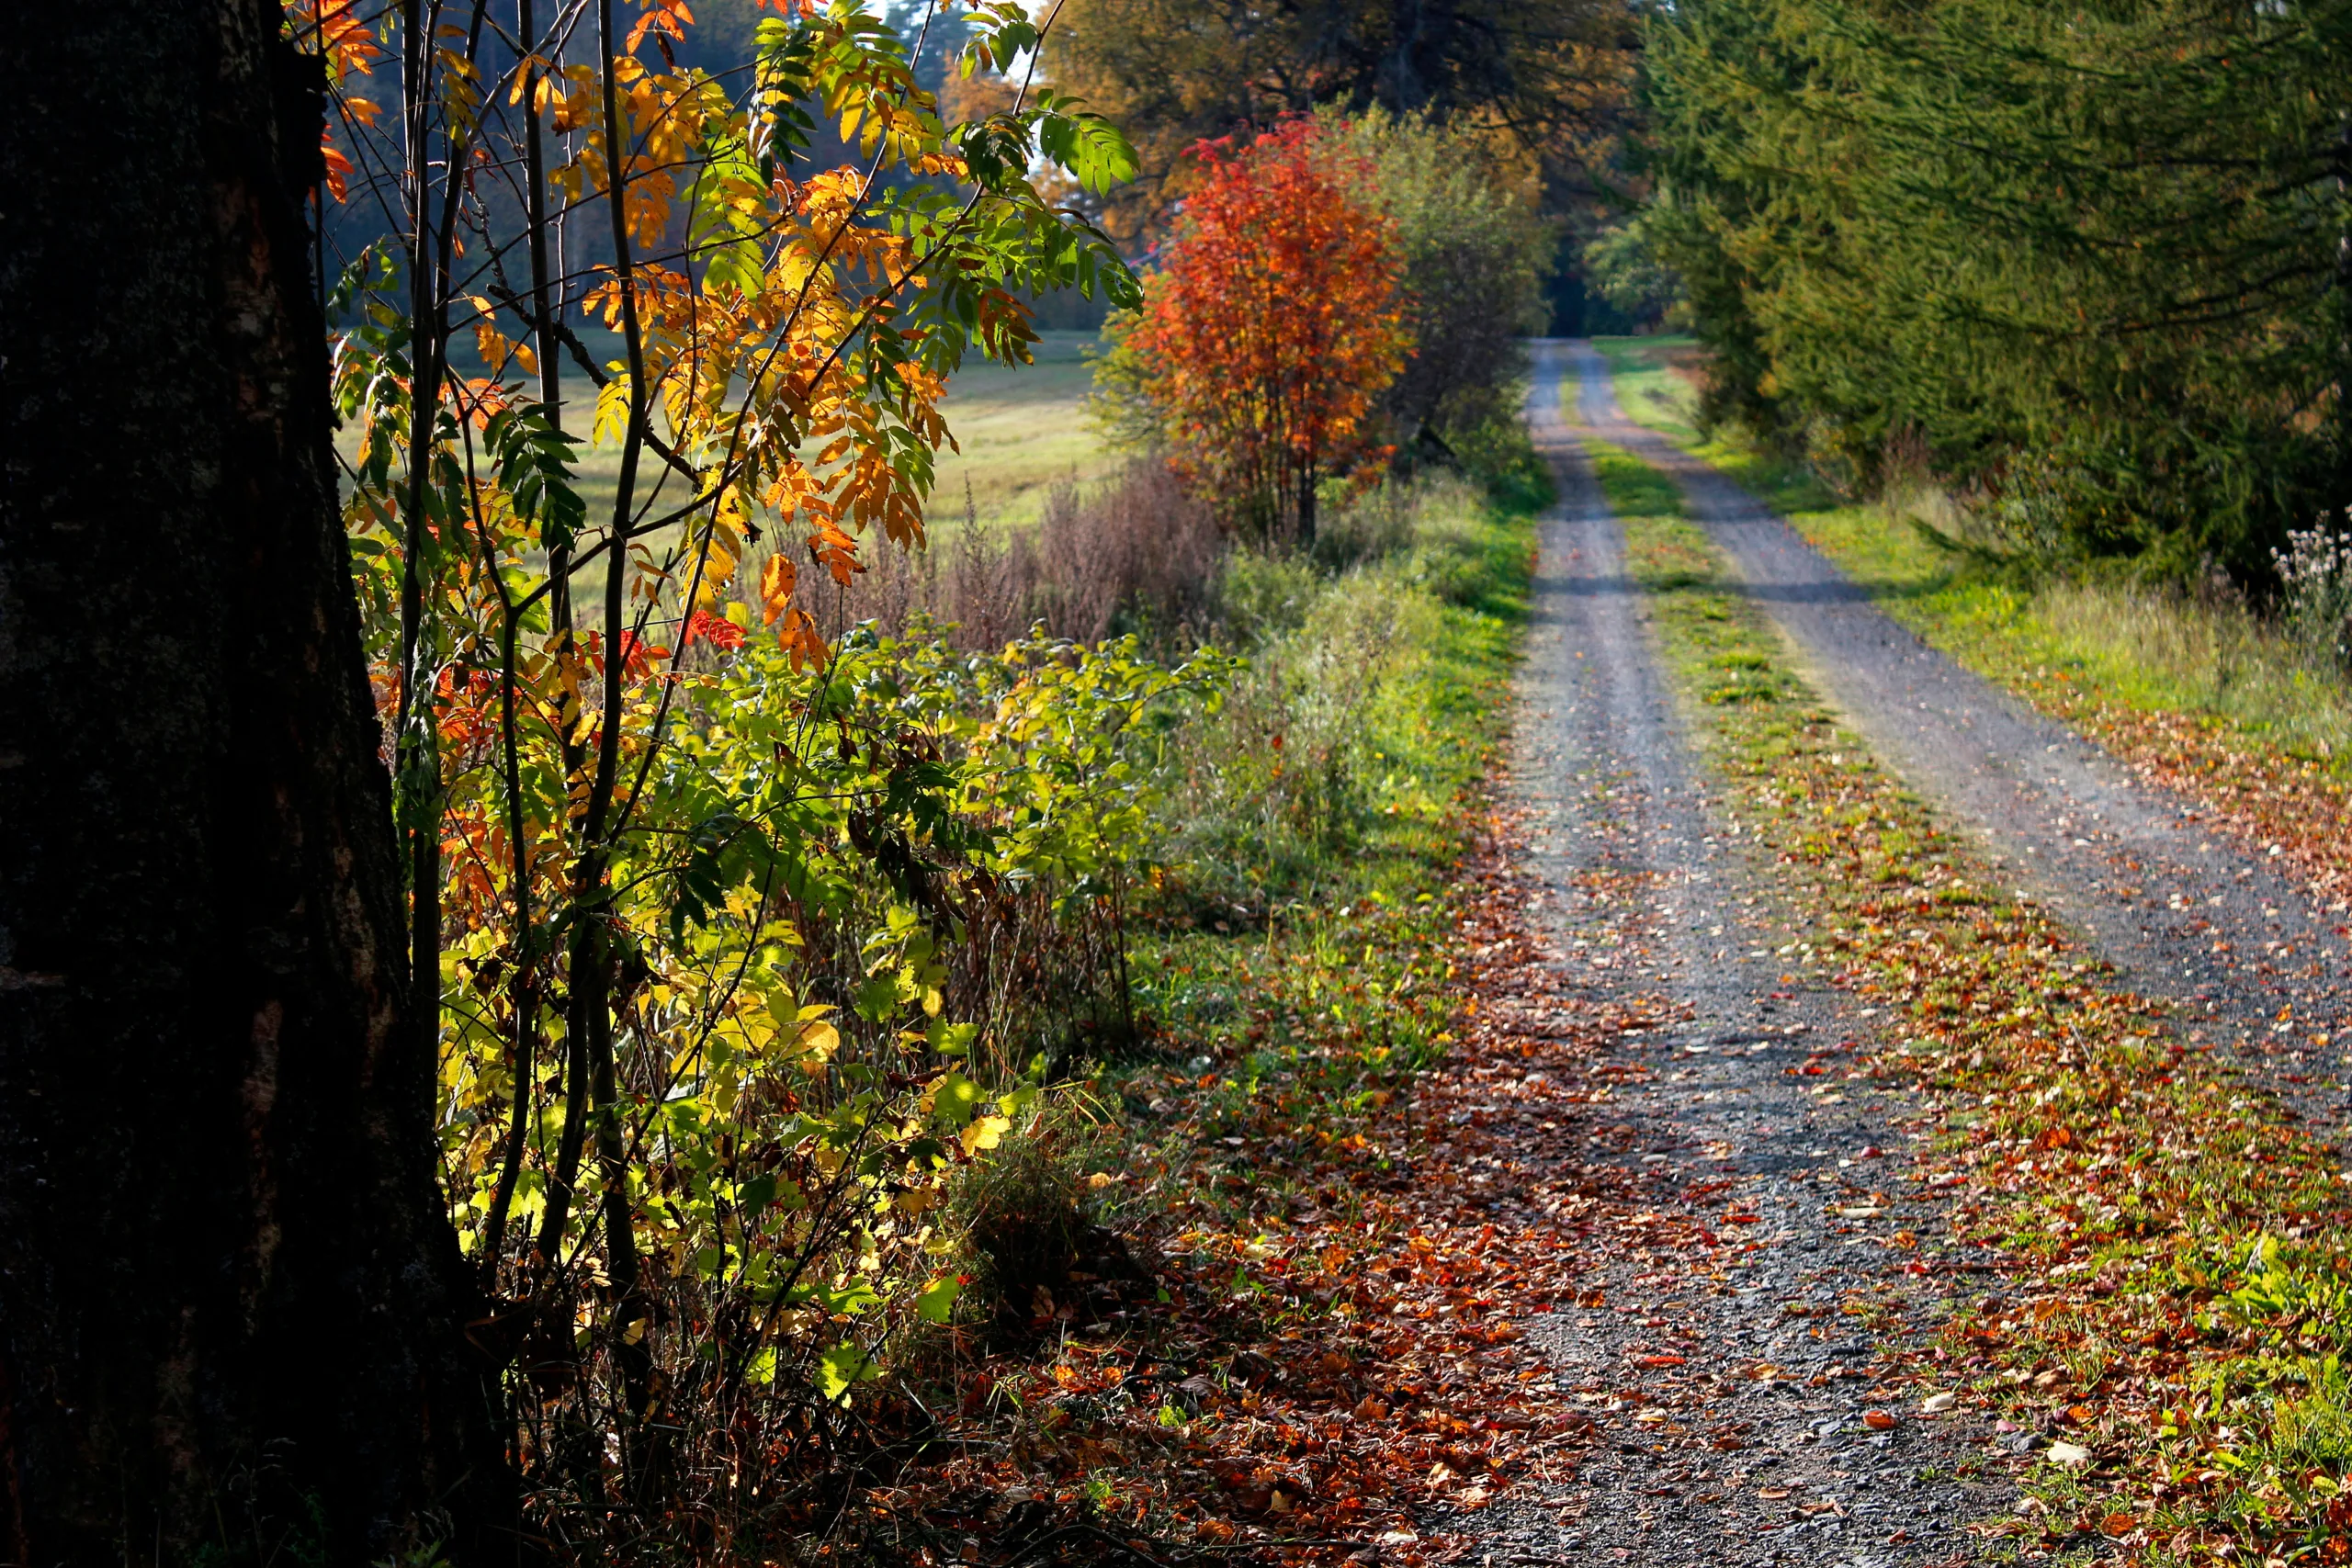 A photograph of a country road with orange leaves scattered on the ground and orange and green trees lining the path